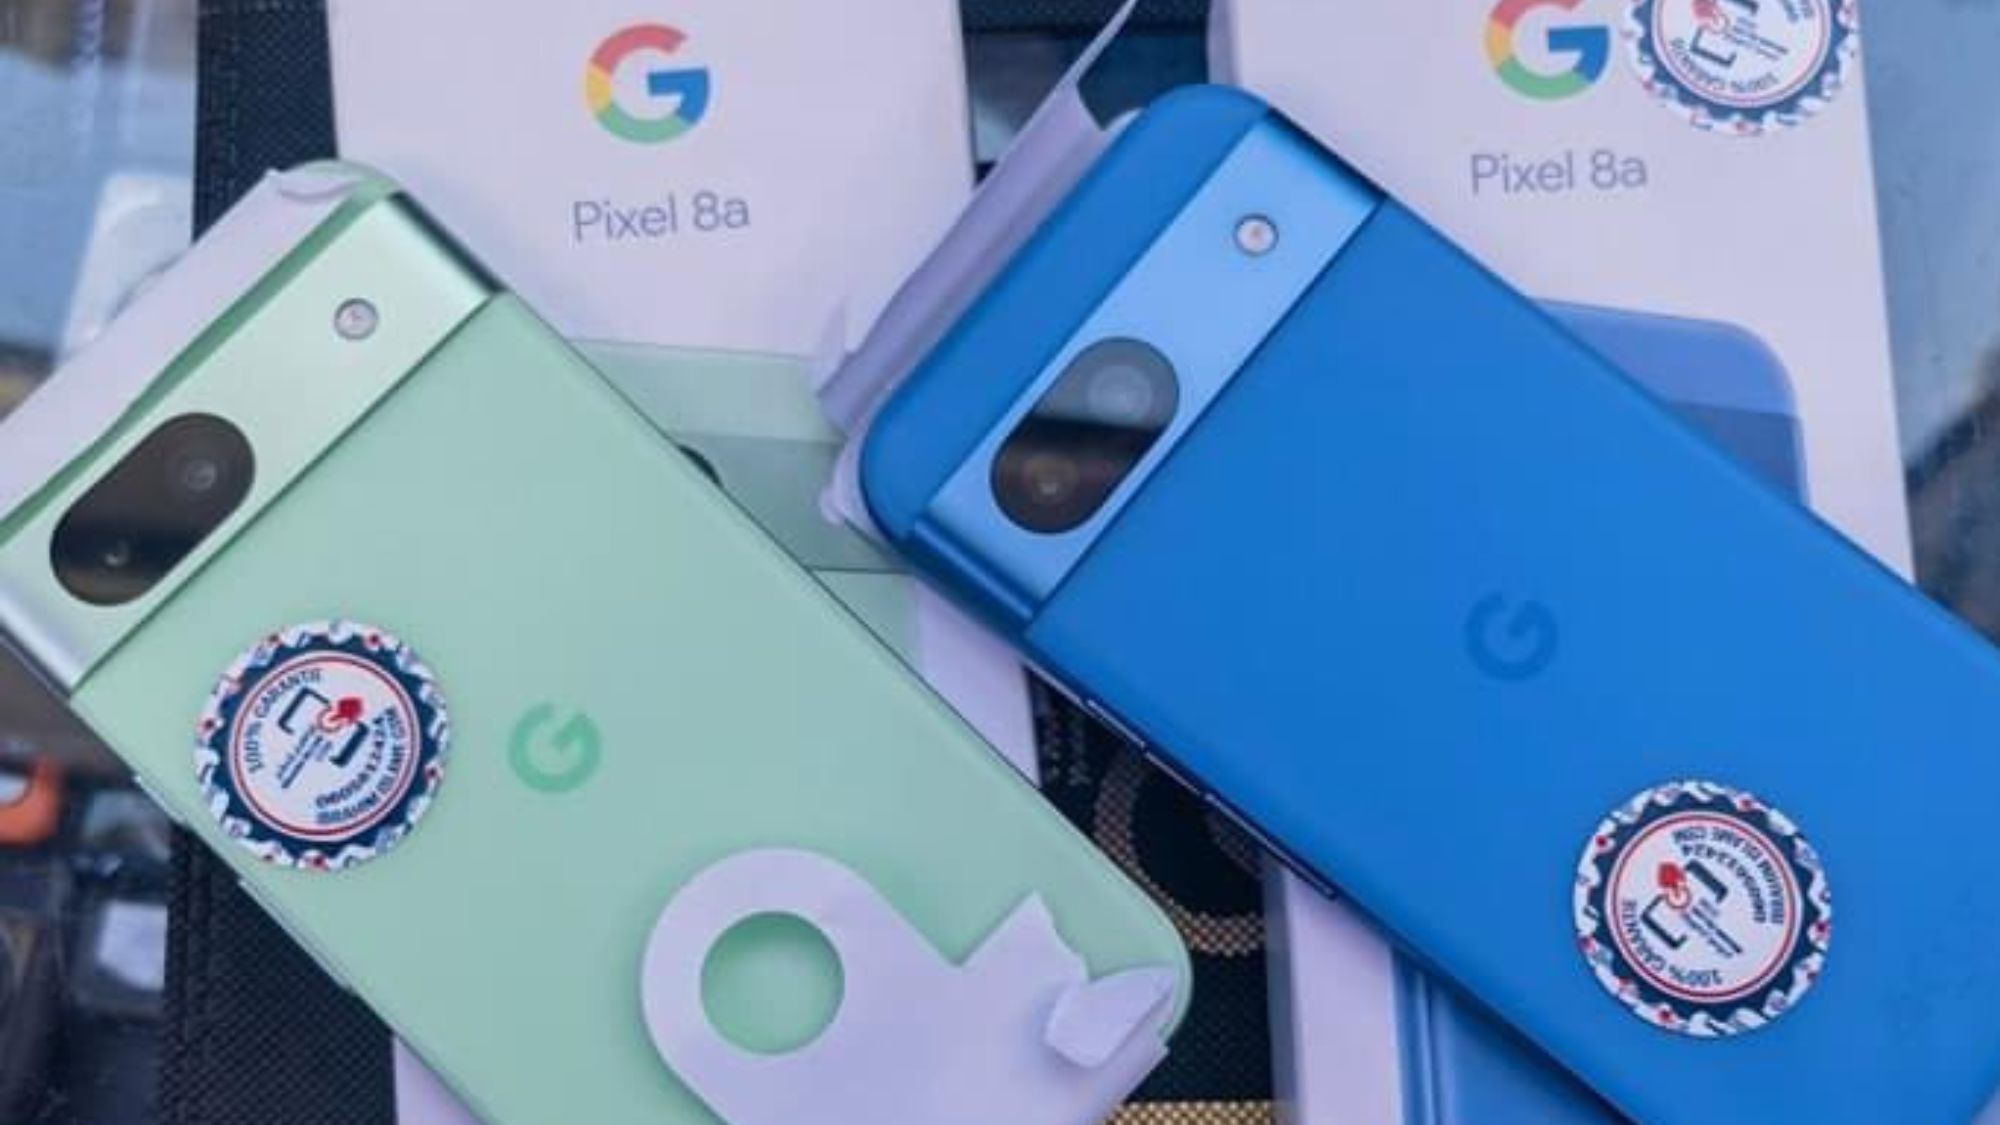 Pixel 8a pricing and battery details rumored ahead of expected launch